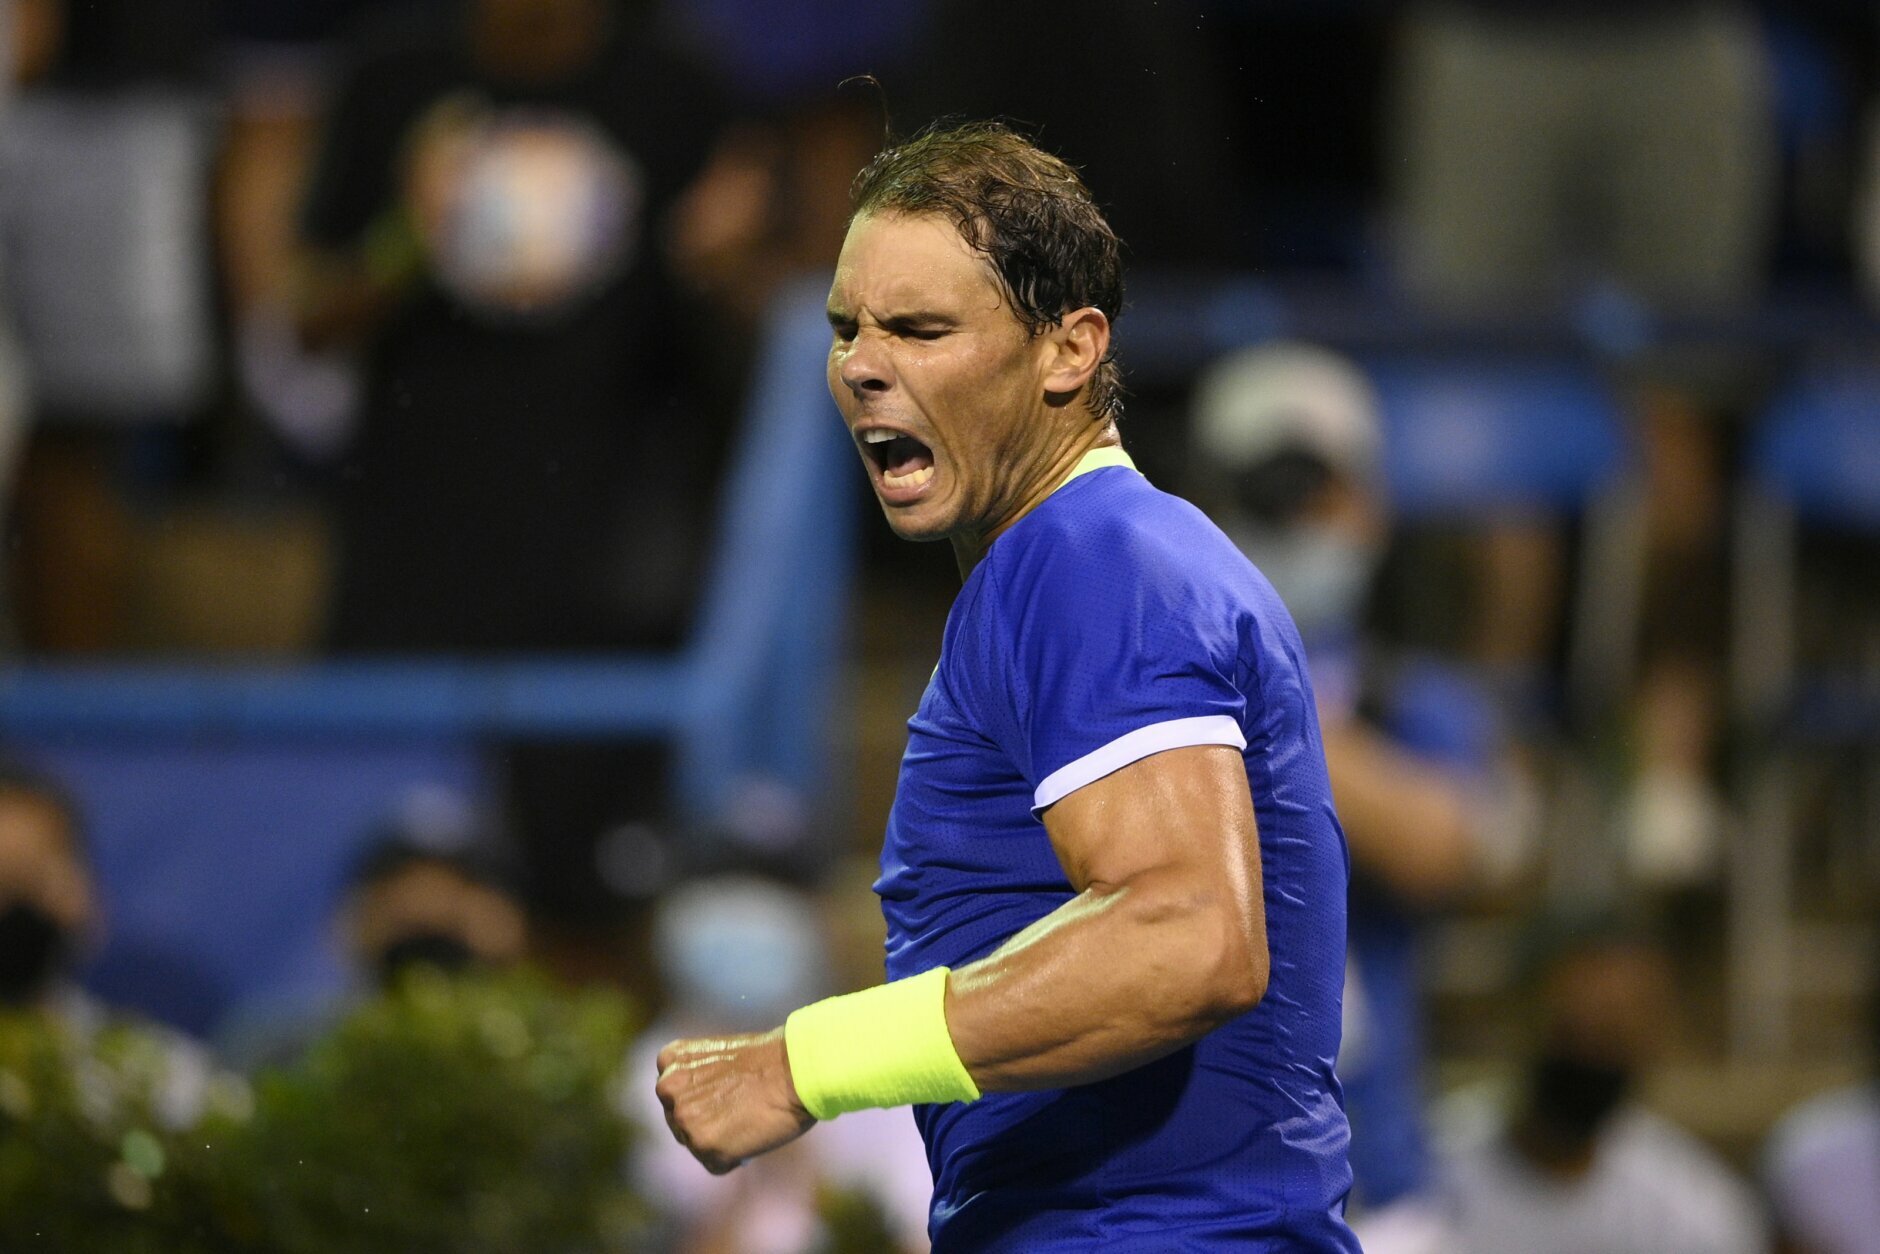 With painful foot, Nadal tops Sock at Washington in return WTOP News